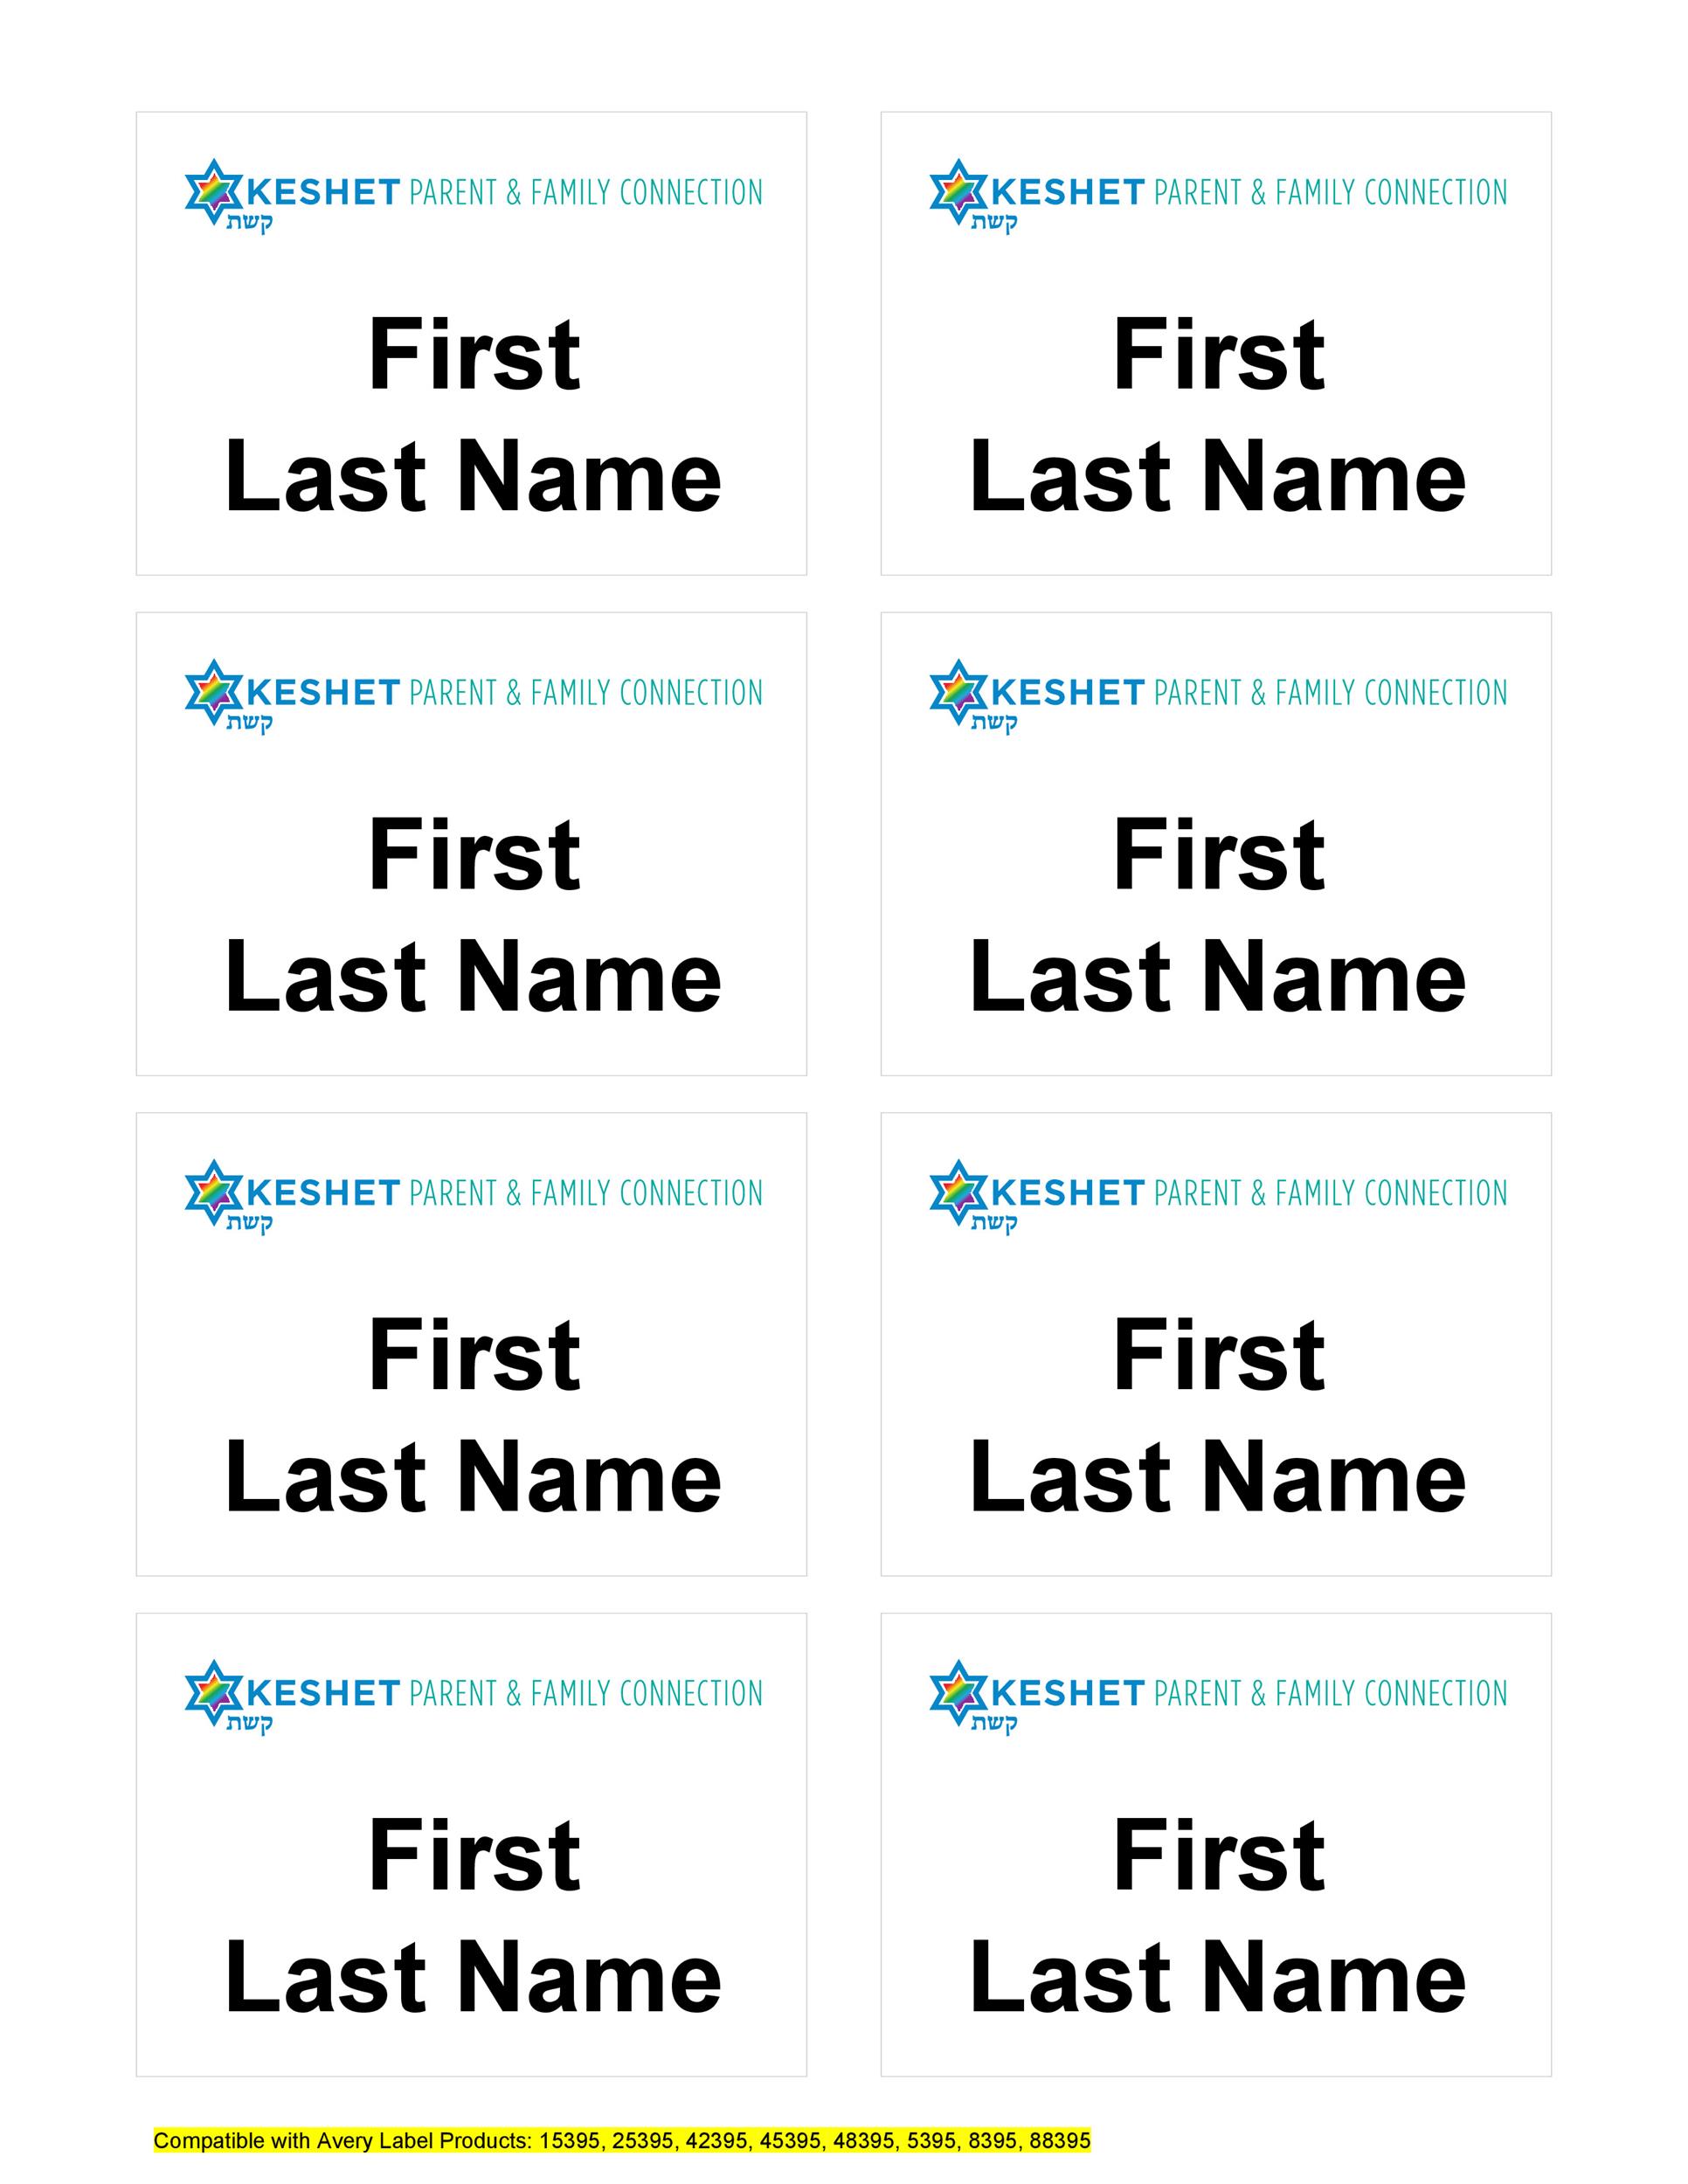 Name Tag Label Template from templatelab.com